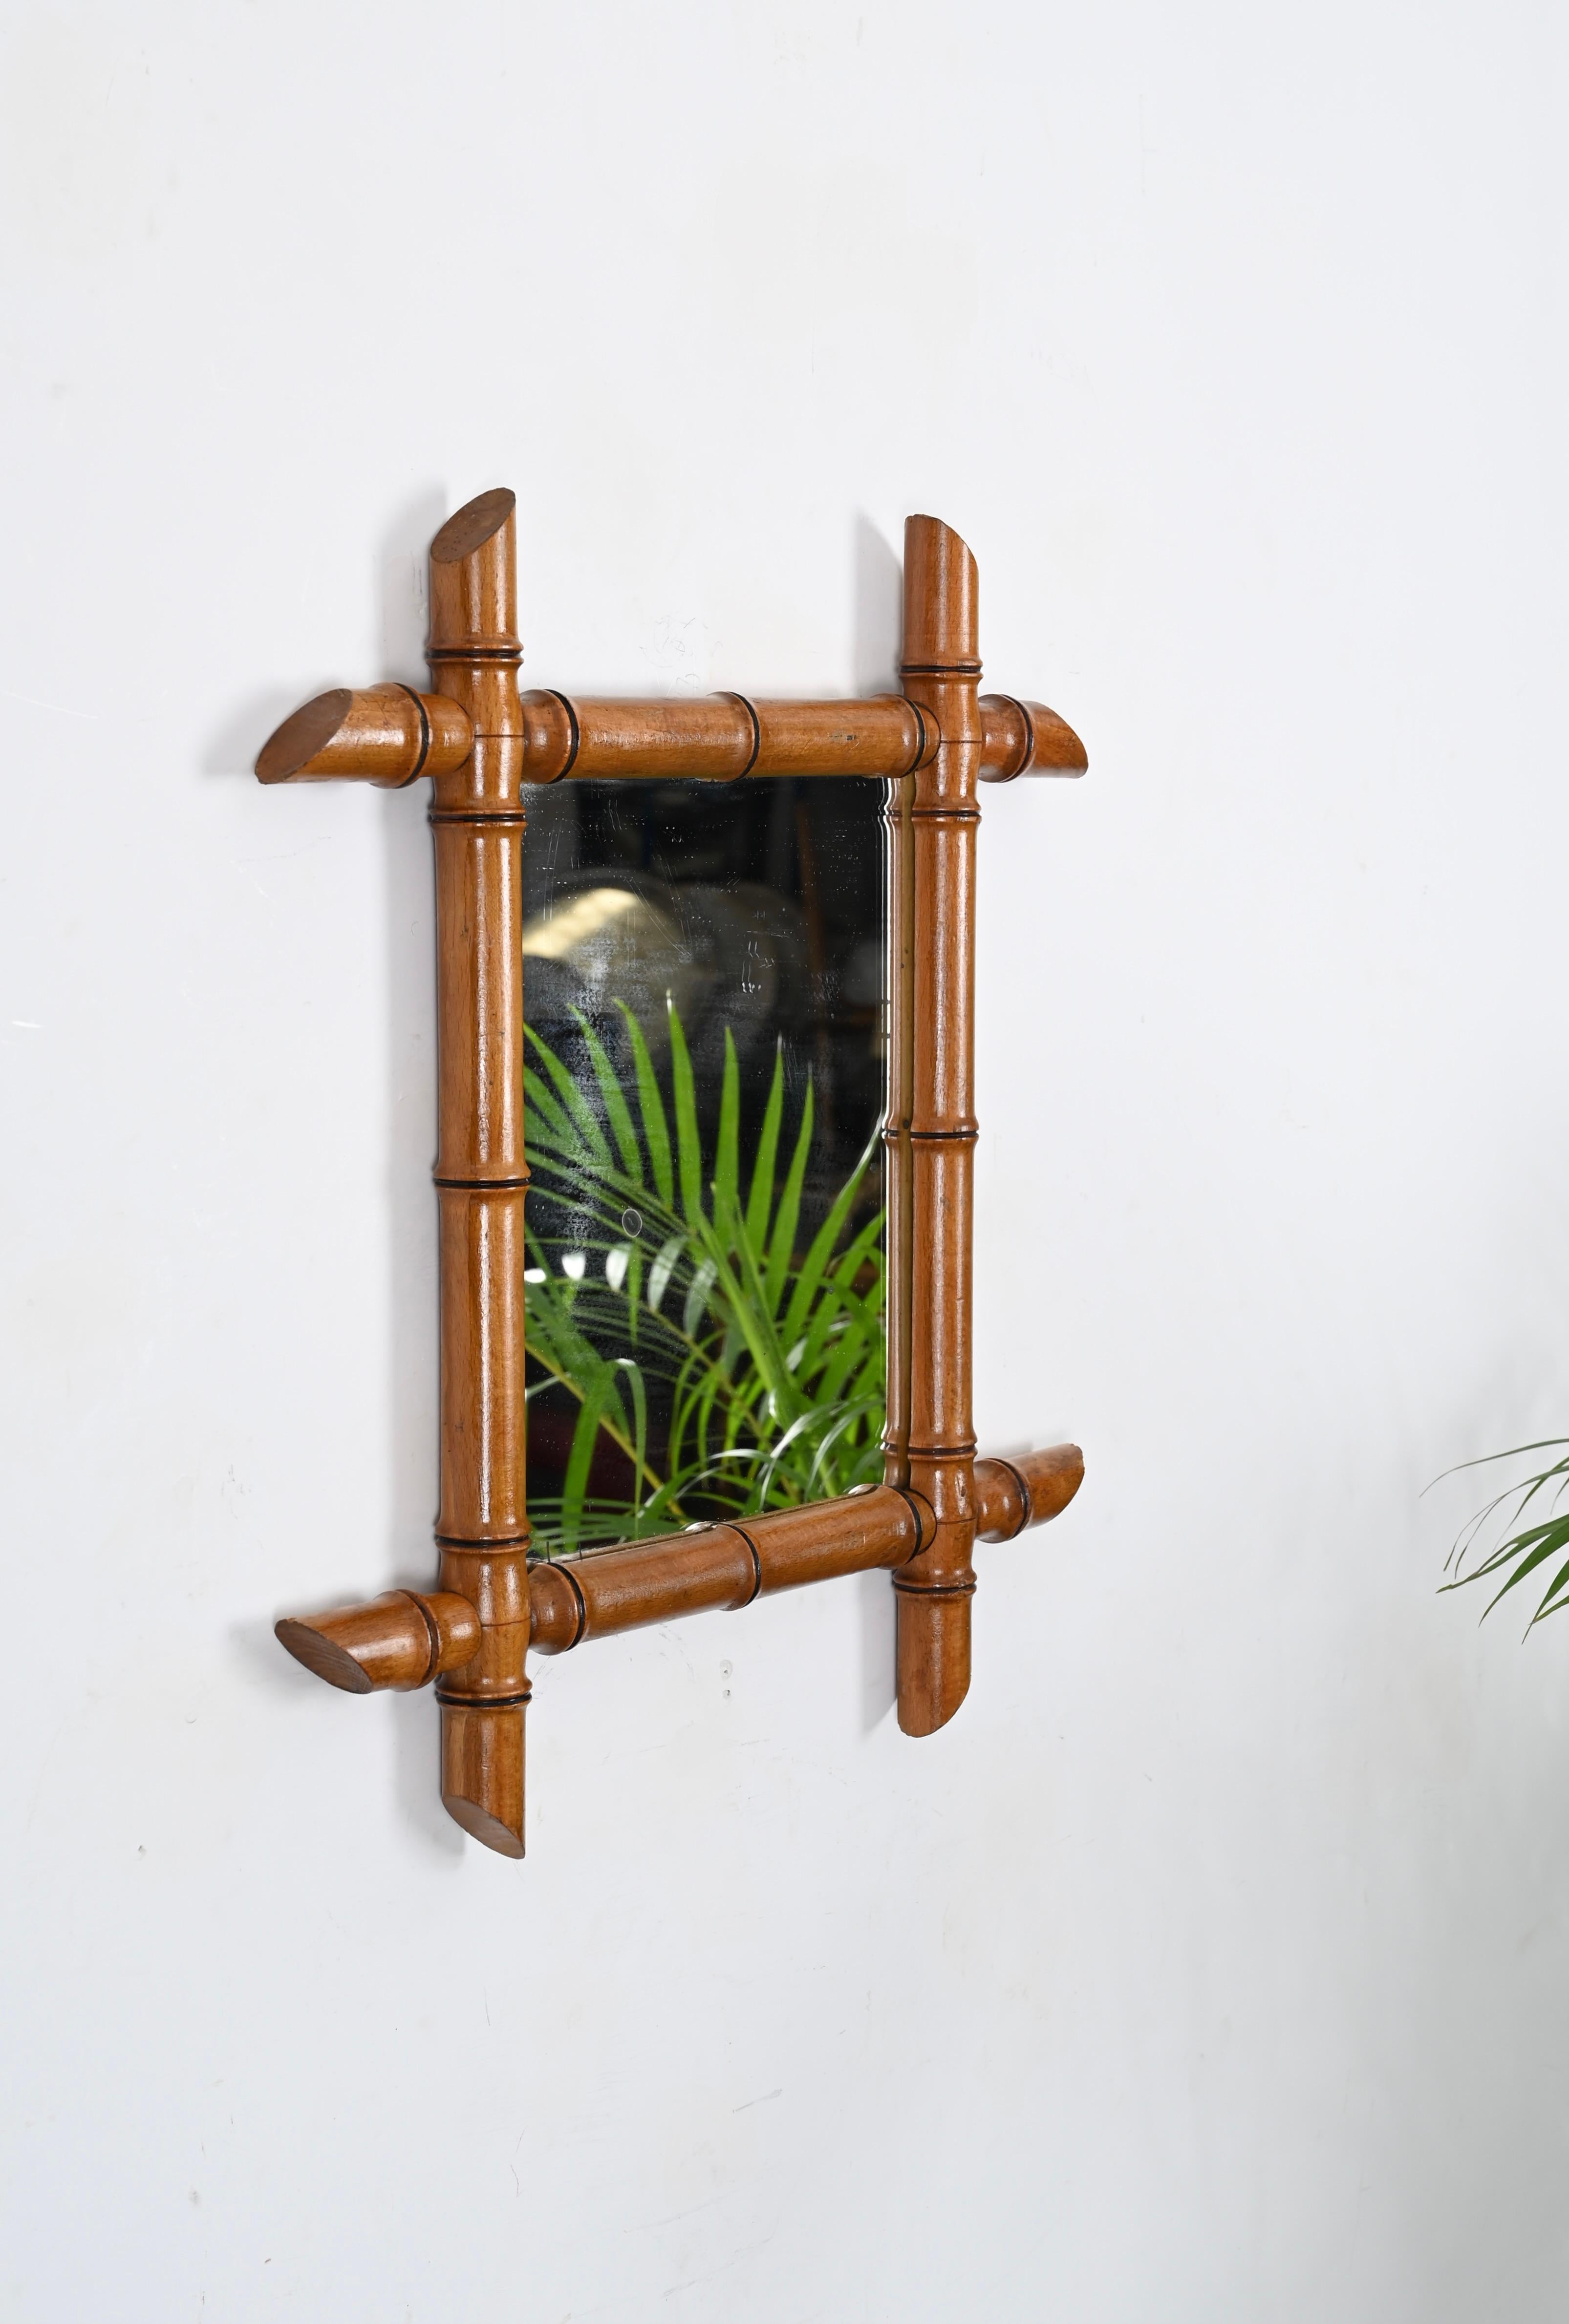 Stunning early 20th century Art Nouveau mirror with beech faux bamboo frame. This wonderful item was produced in France in the early '900.

This piece is very attractive thanks to the gorgeous patina of beech and the sinous lines. The mirror is